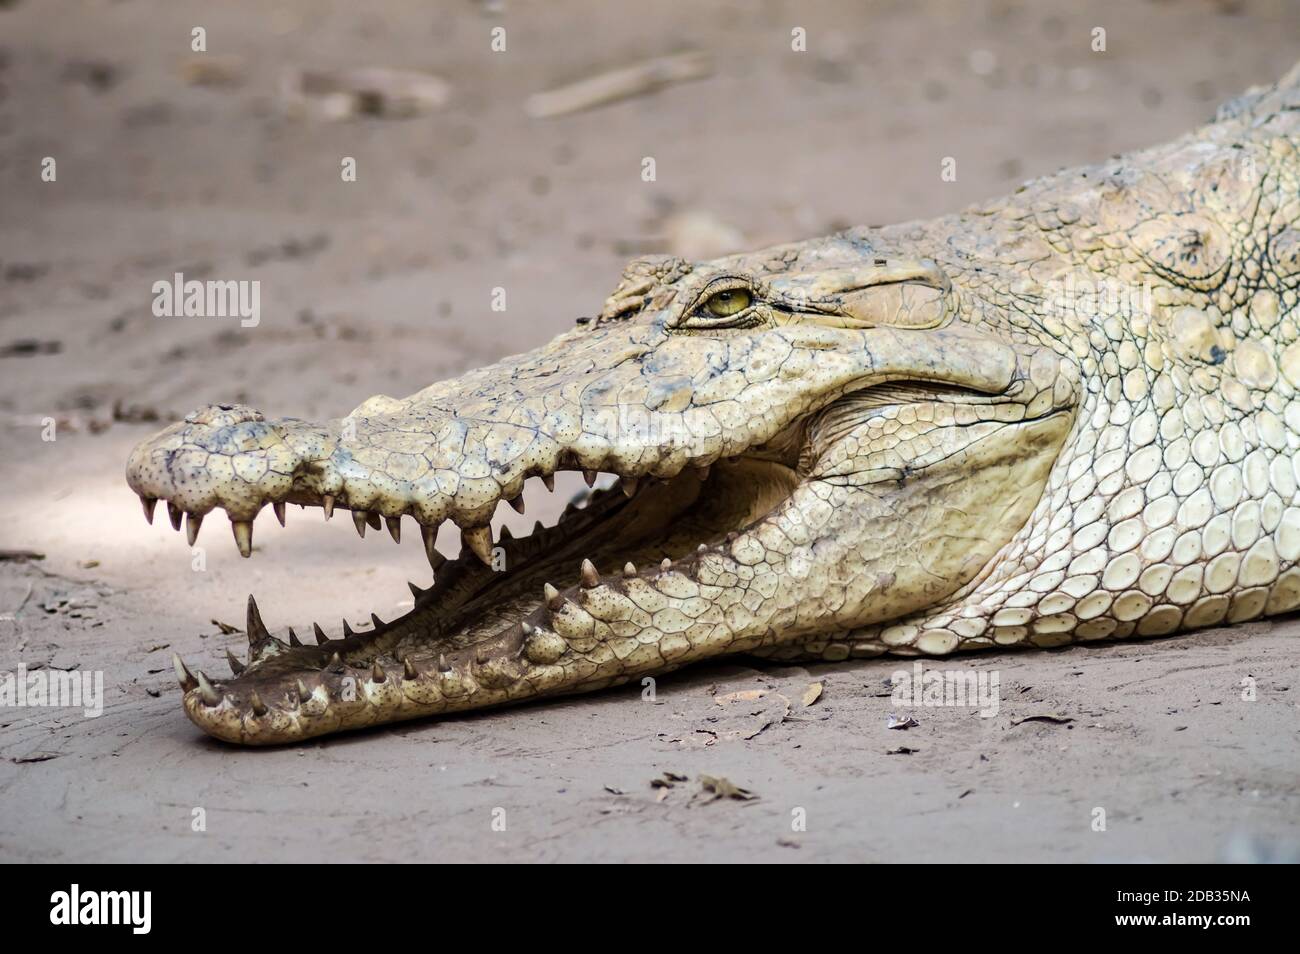 A crocodile basks in the heat of Gambia, West Africa. Natural, green. Stock Photo